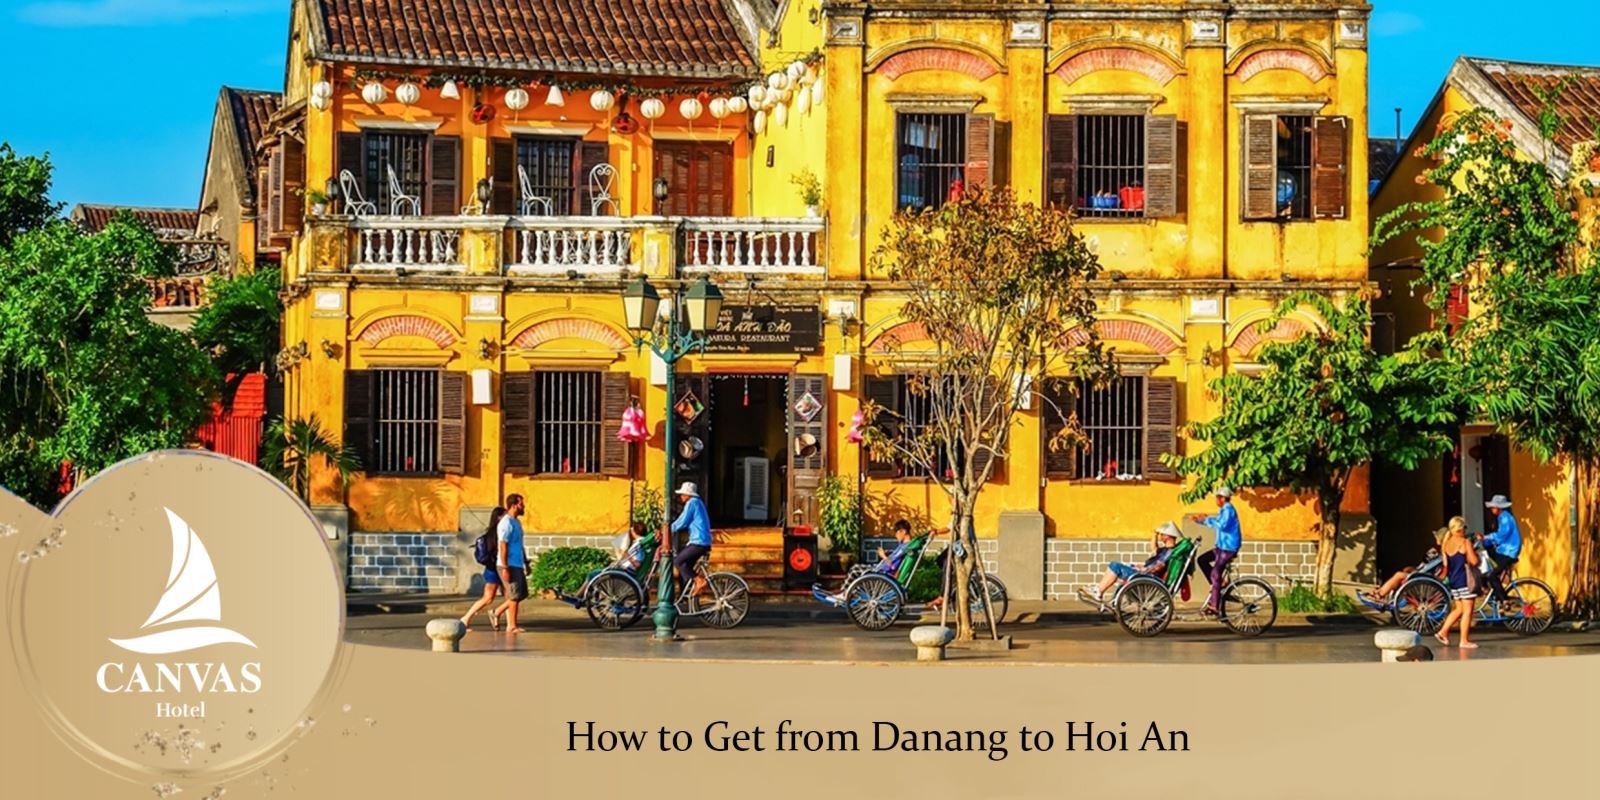 How to Get from Danang to Hoi An?